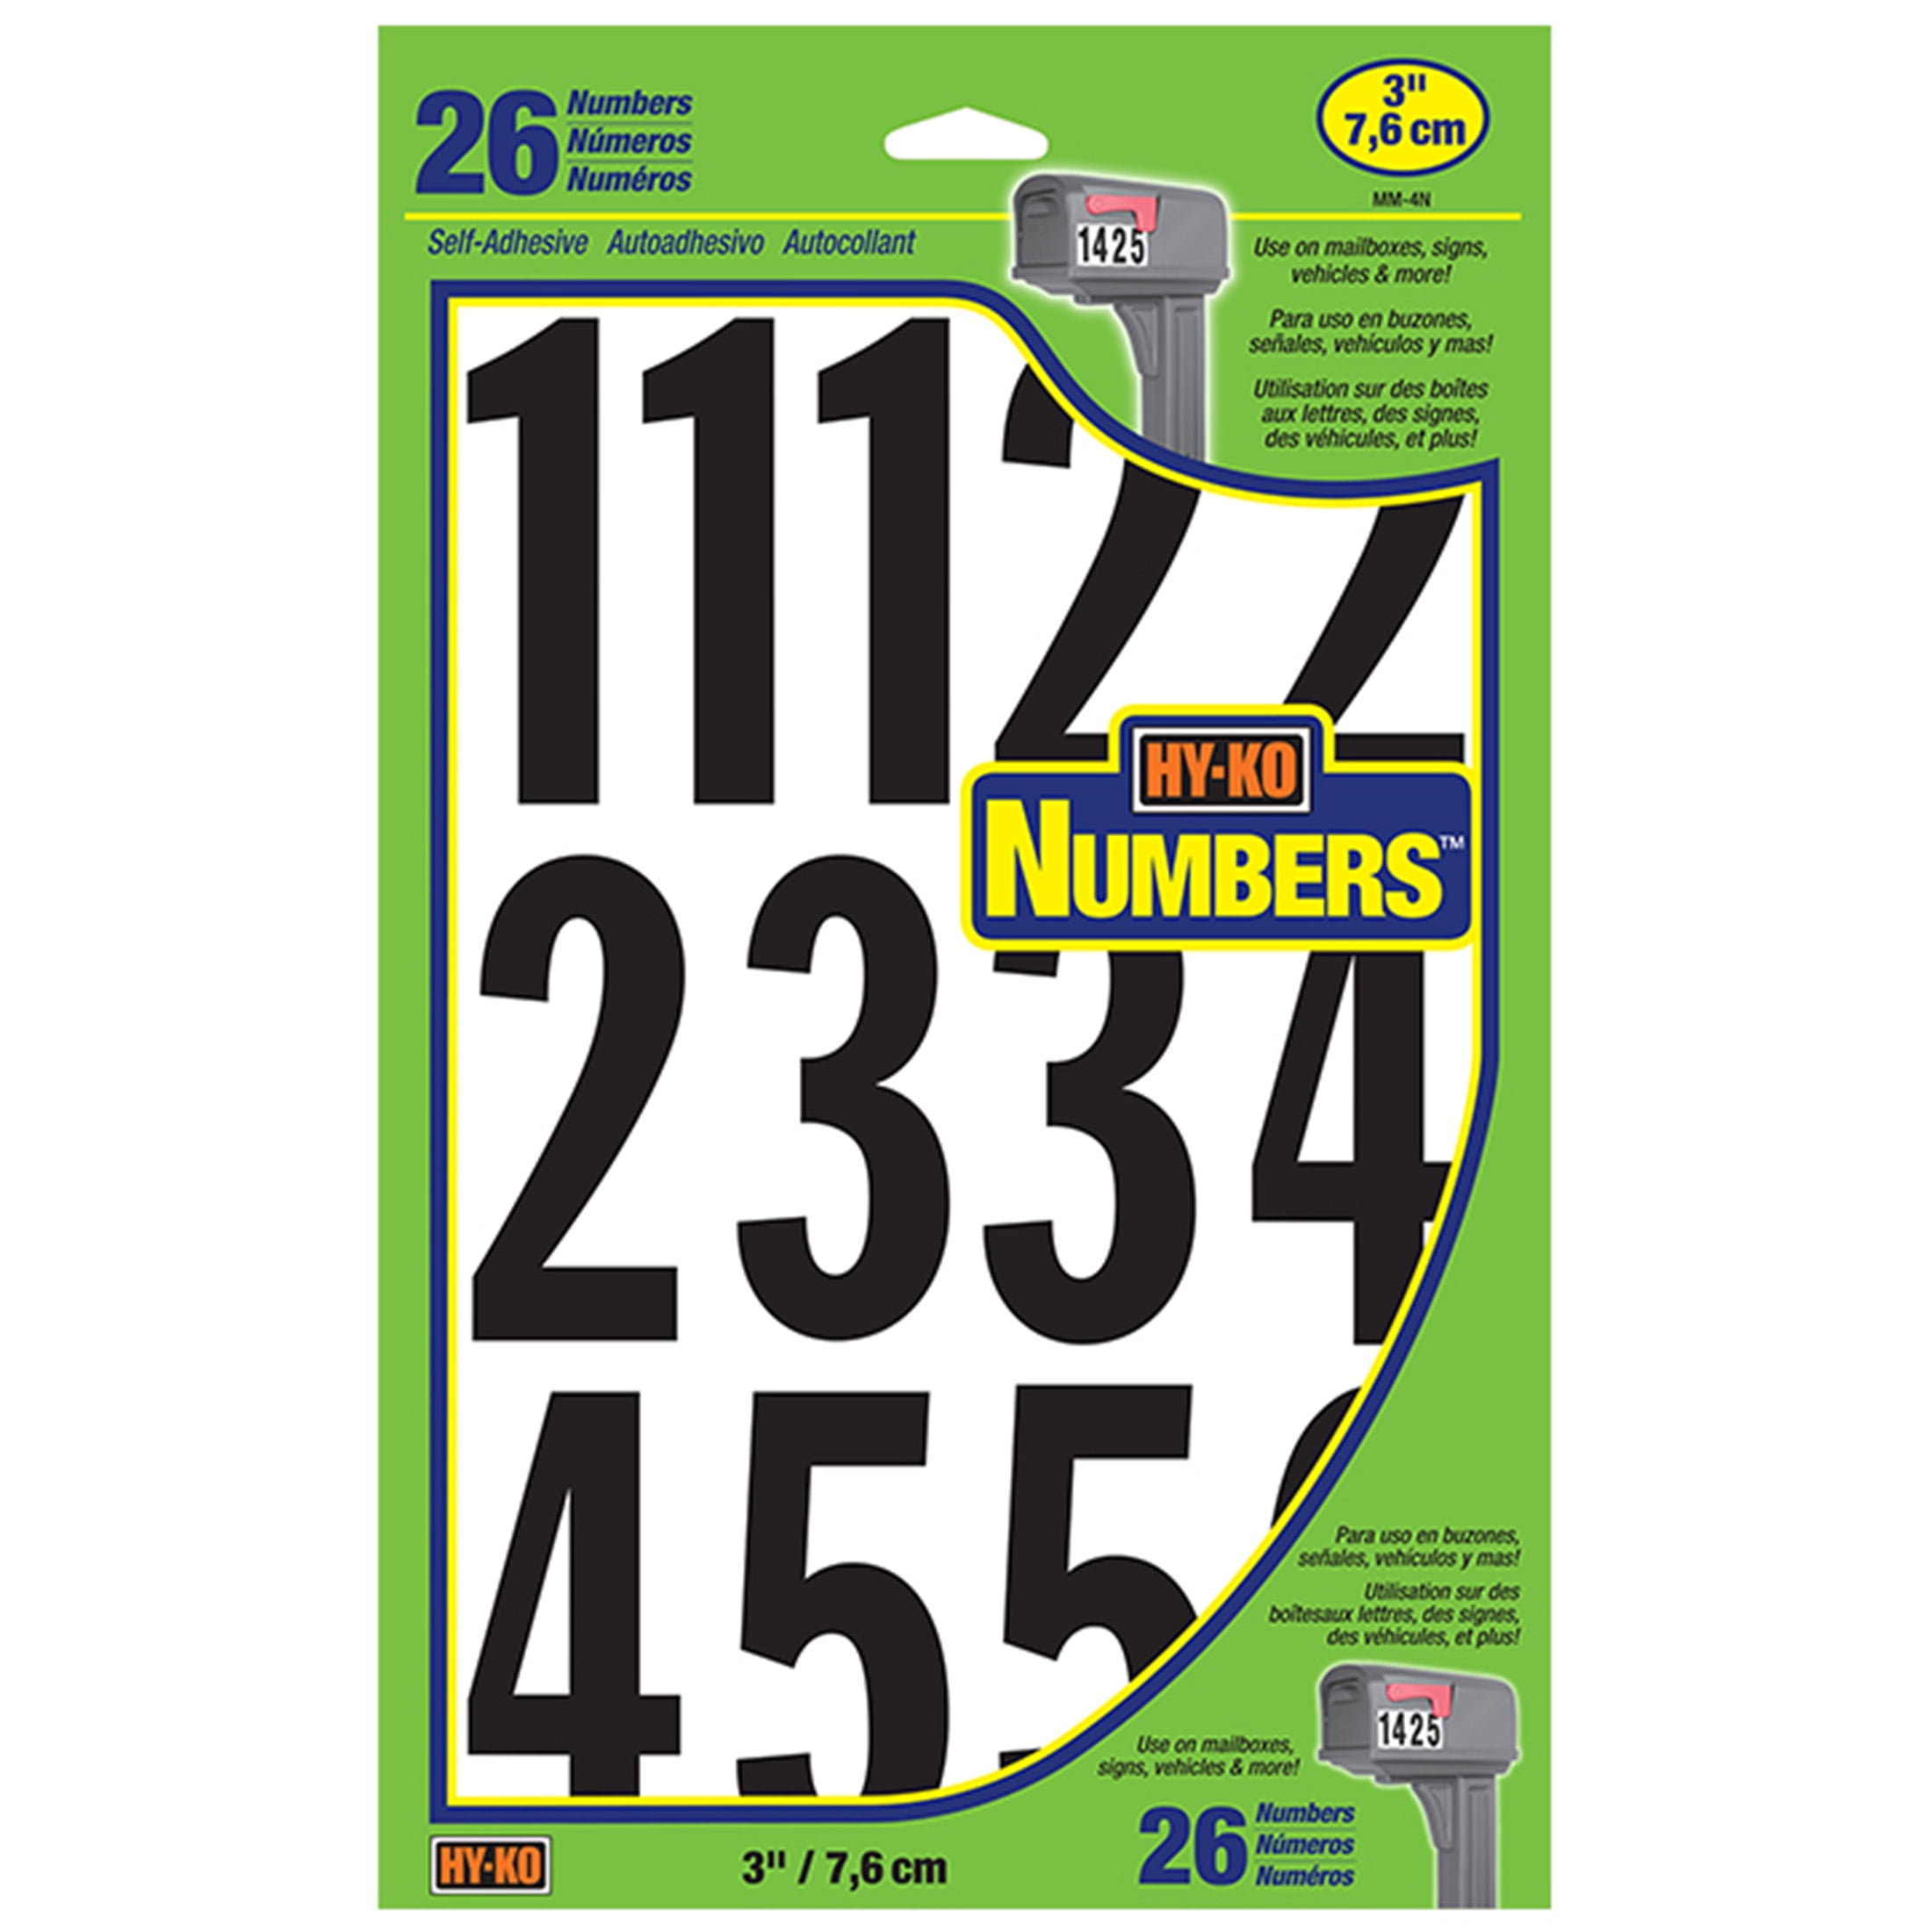 1, 2, 3 SELF ADHESIVE VINYL LETTERS & NUMBERS UPPER STICKERS CAR STICKER  - AliExpress